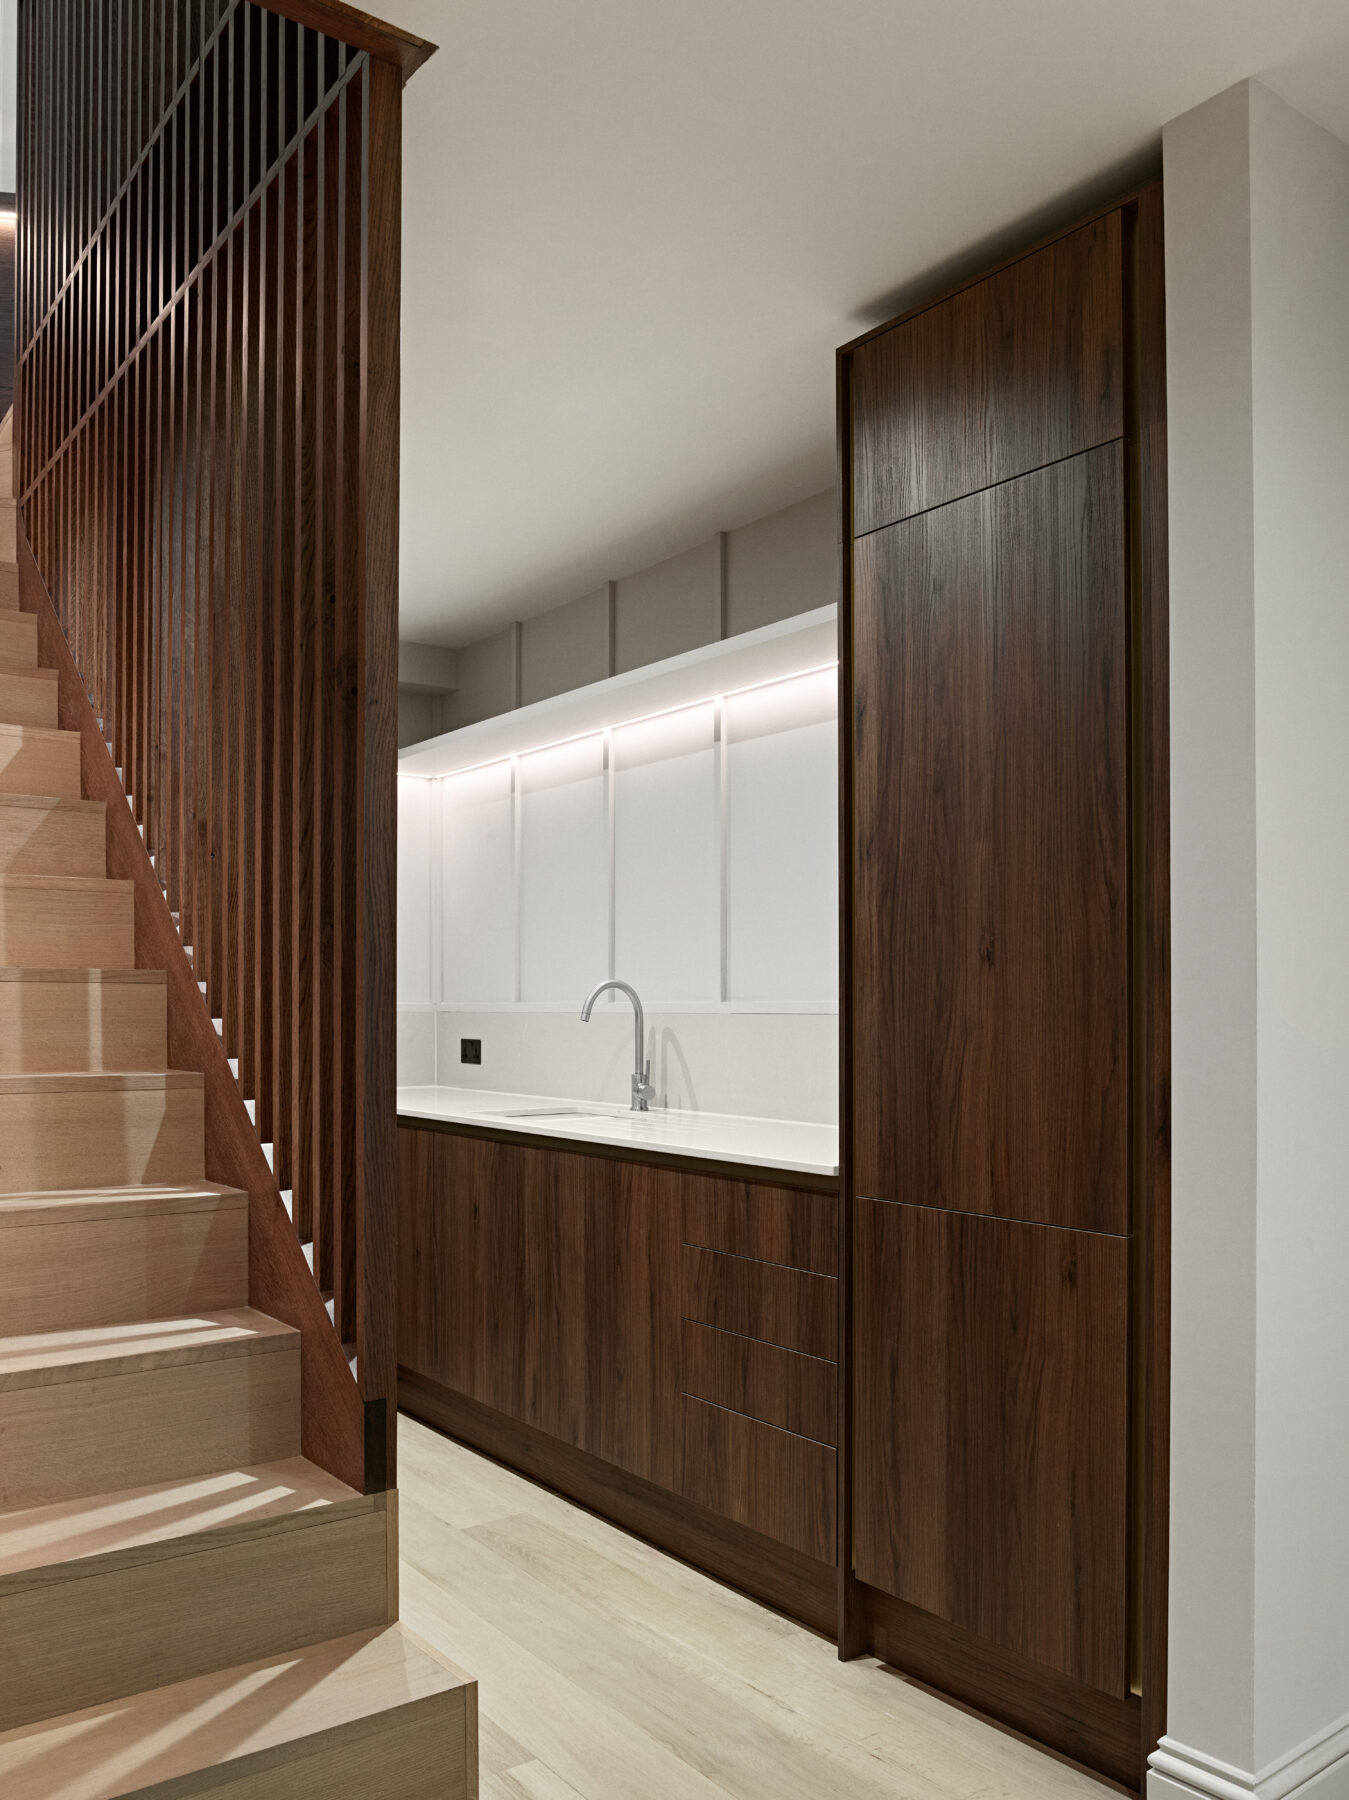 Archisearch Knightsbridge Apartment - Renovation by Georgios Apostolopoulos Architects, in collaboration with Manuel Gonzalez and Vasilis Tsesmetzis, in London